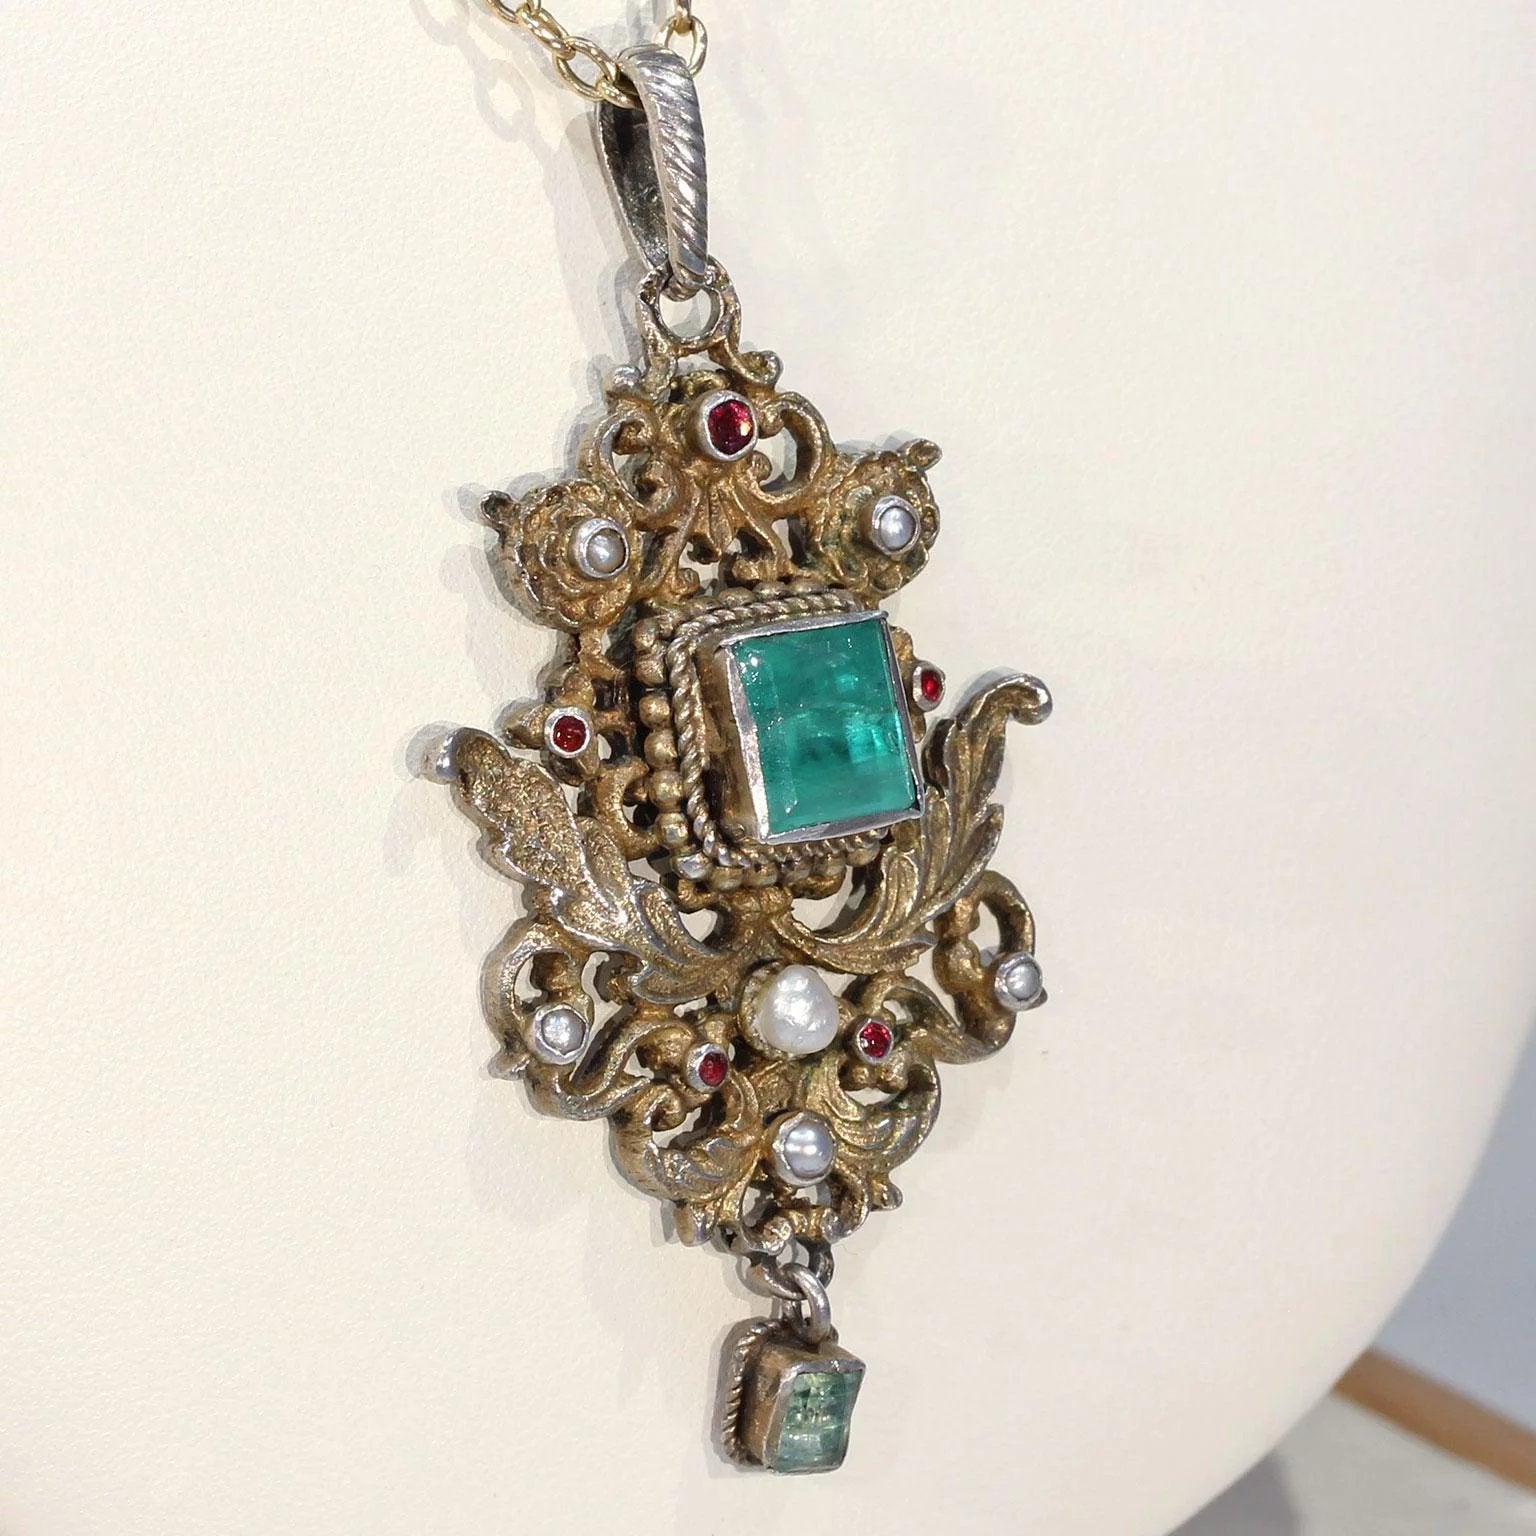 Antique Austro-Hungarian Emerald Pendant with Pearls and Rubies